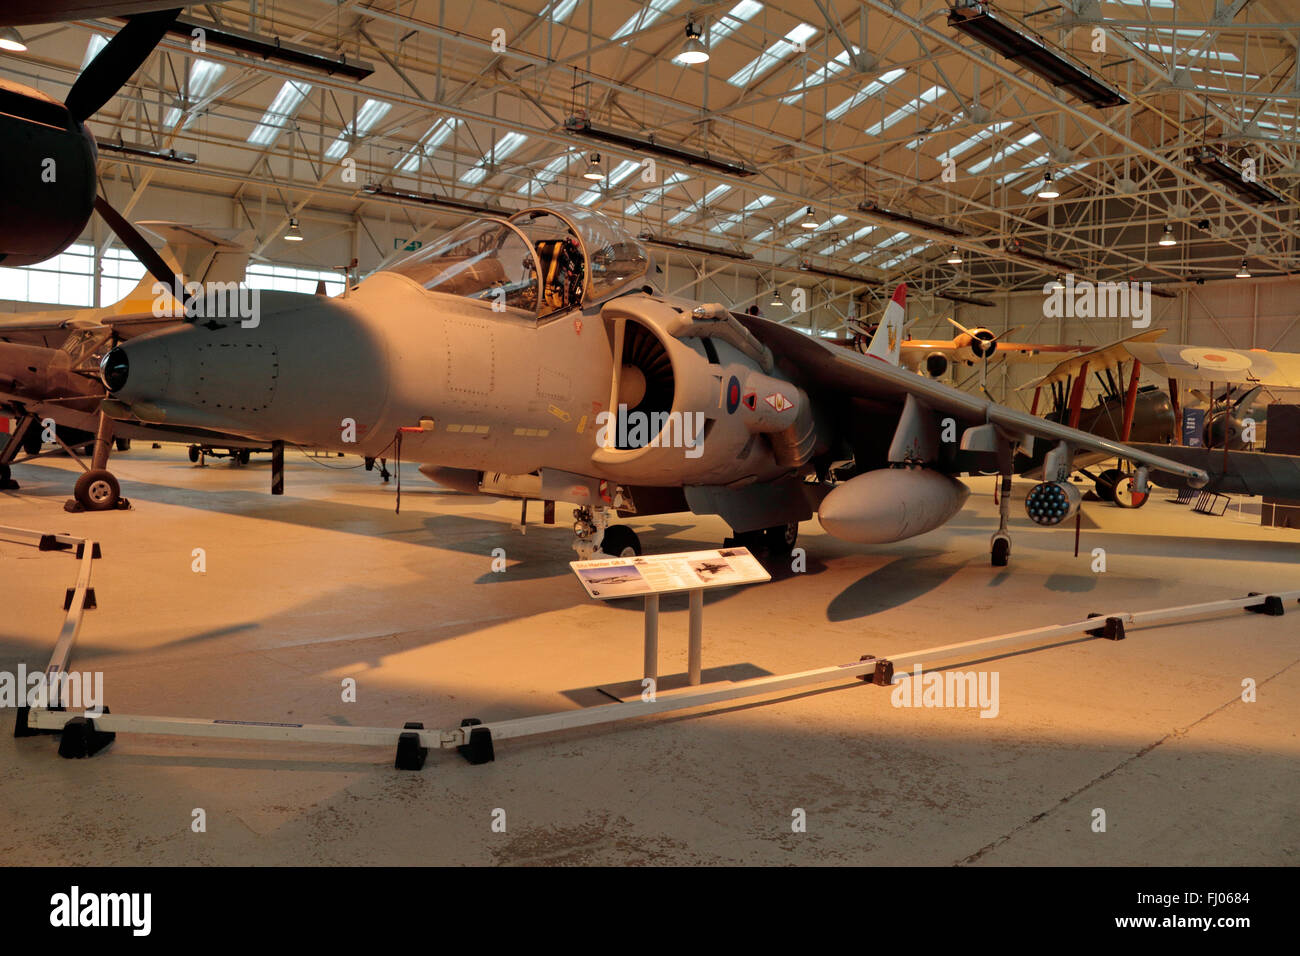 The BAe Harrier GR.9 (Harrier jump jet) on display at the RAF Museum at RAF Cosford, Shropshire, UK. Stock Photo